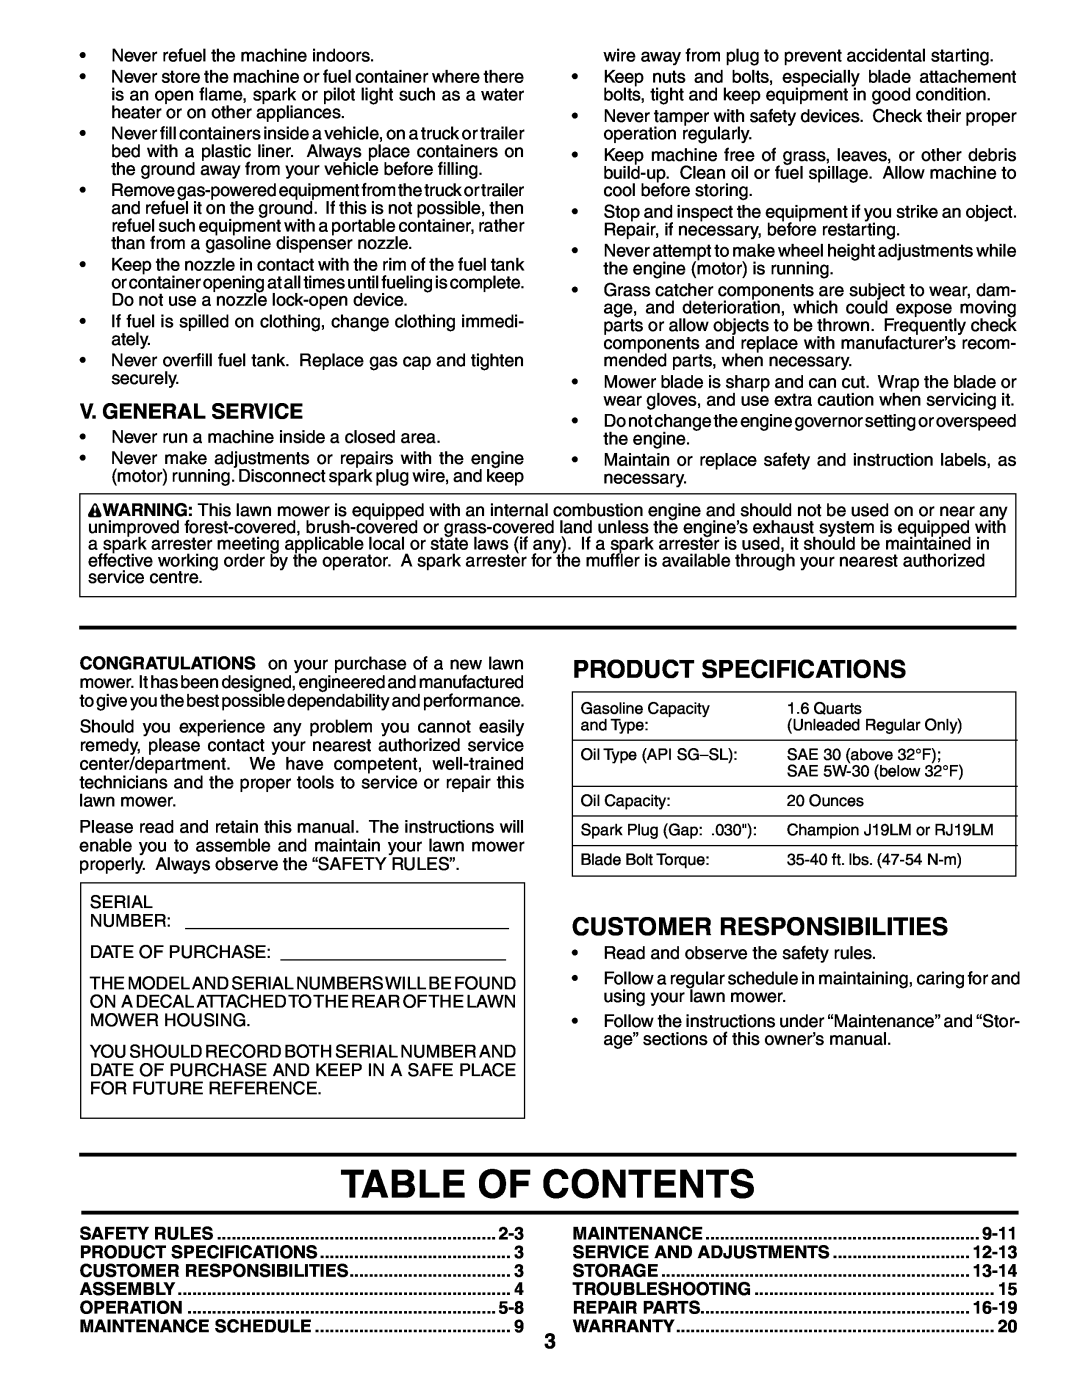 Husqvarna 6522SH Table Of Contents, Product Specifications, Customer Responsibilities, V. General Service, 9-11, 12-13 